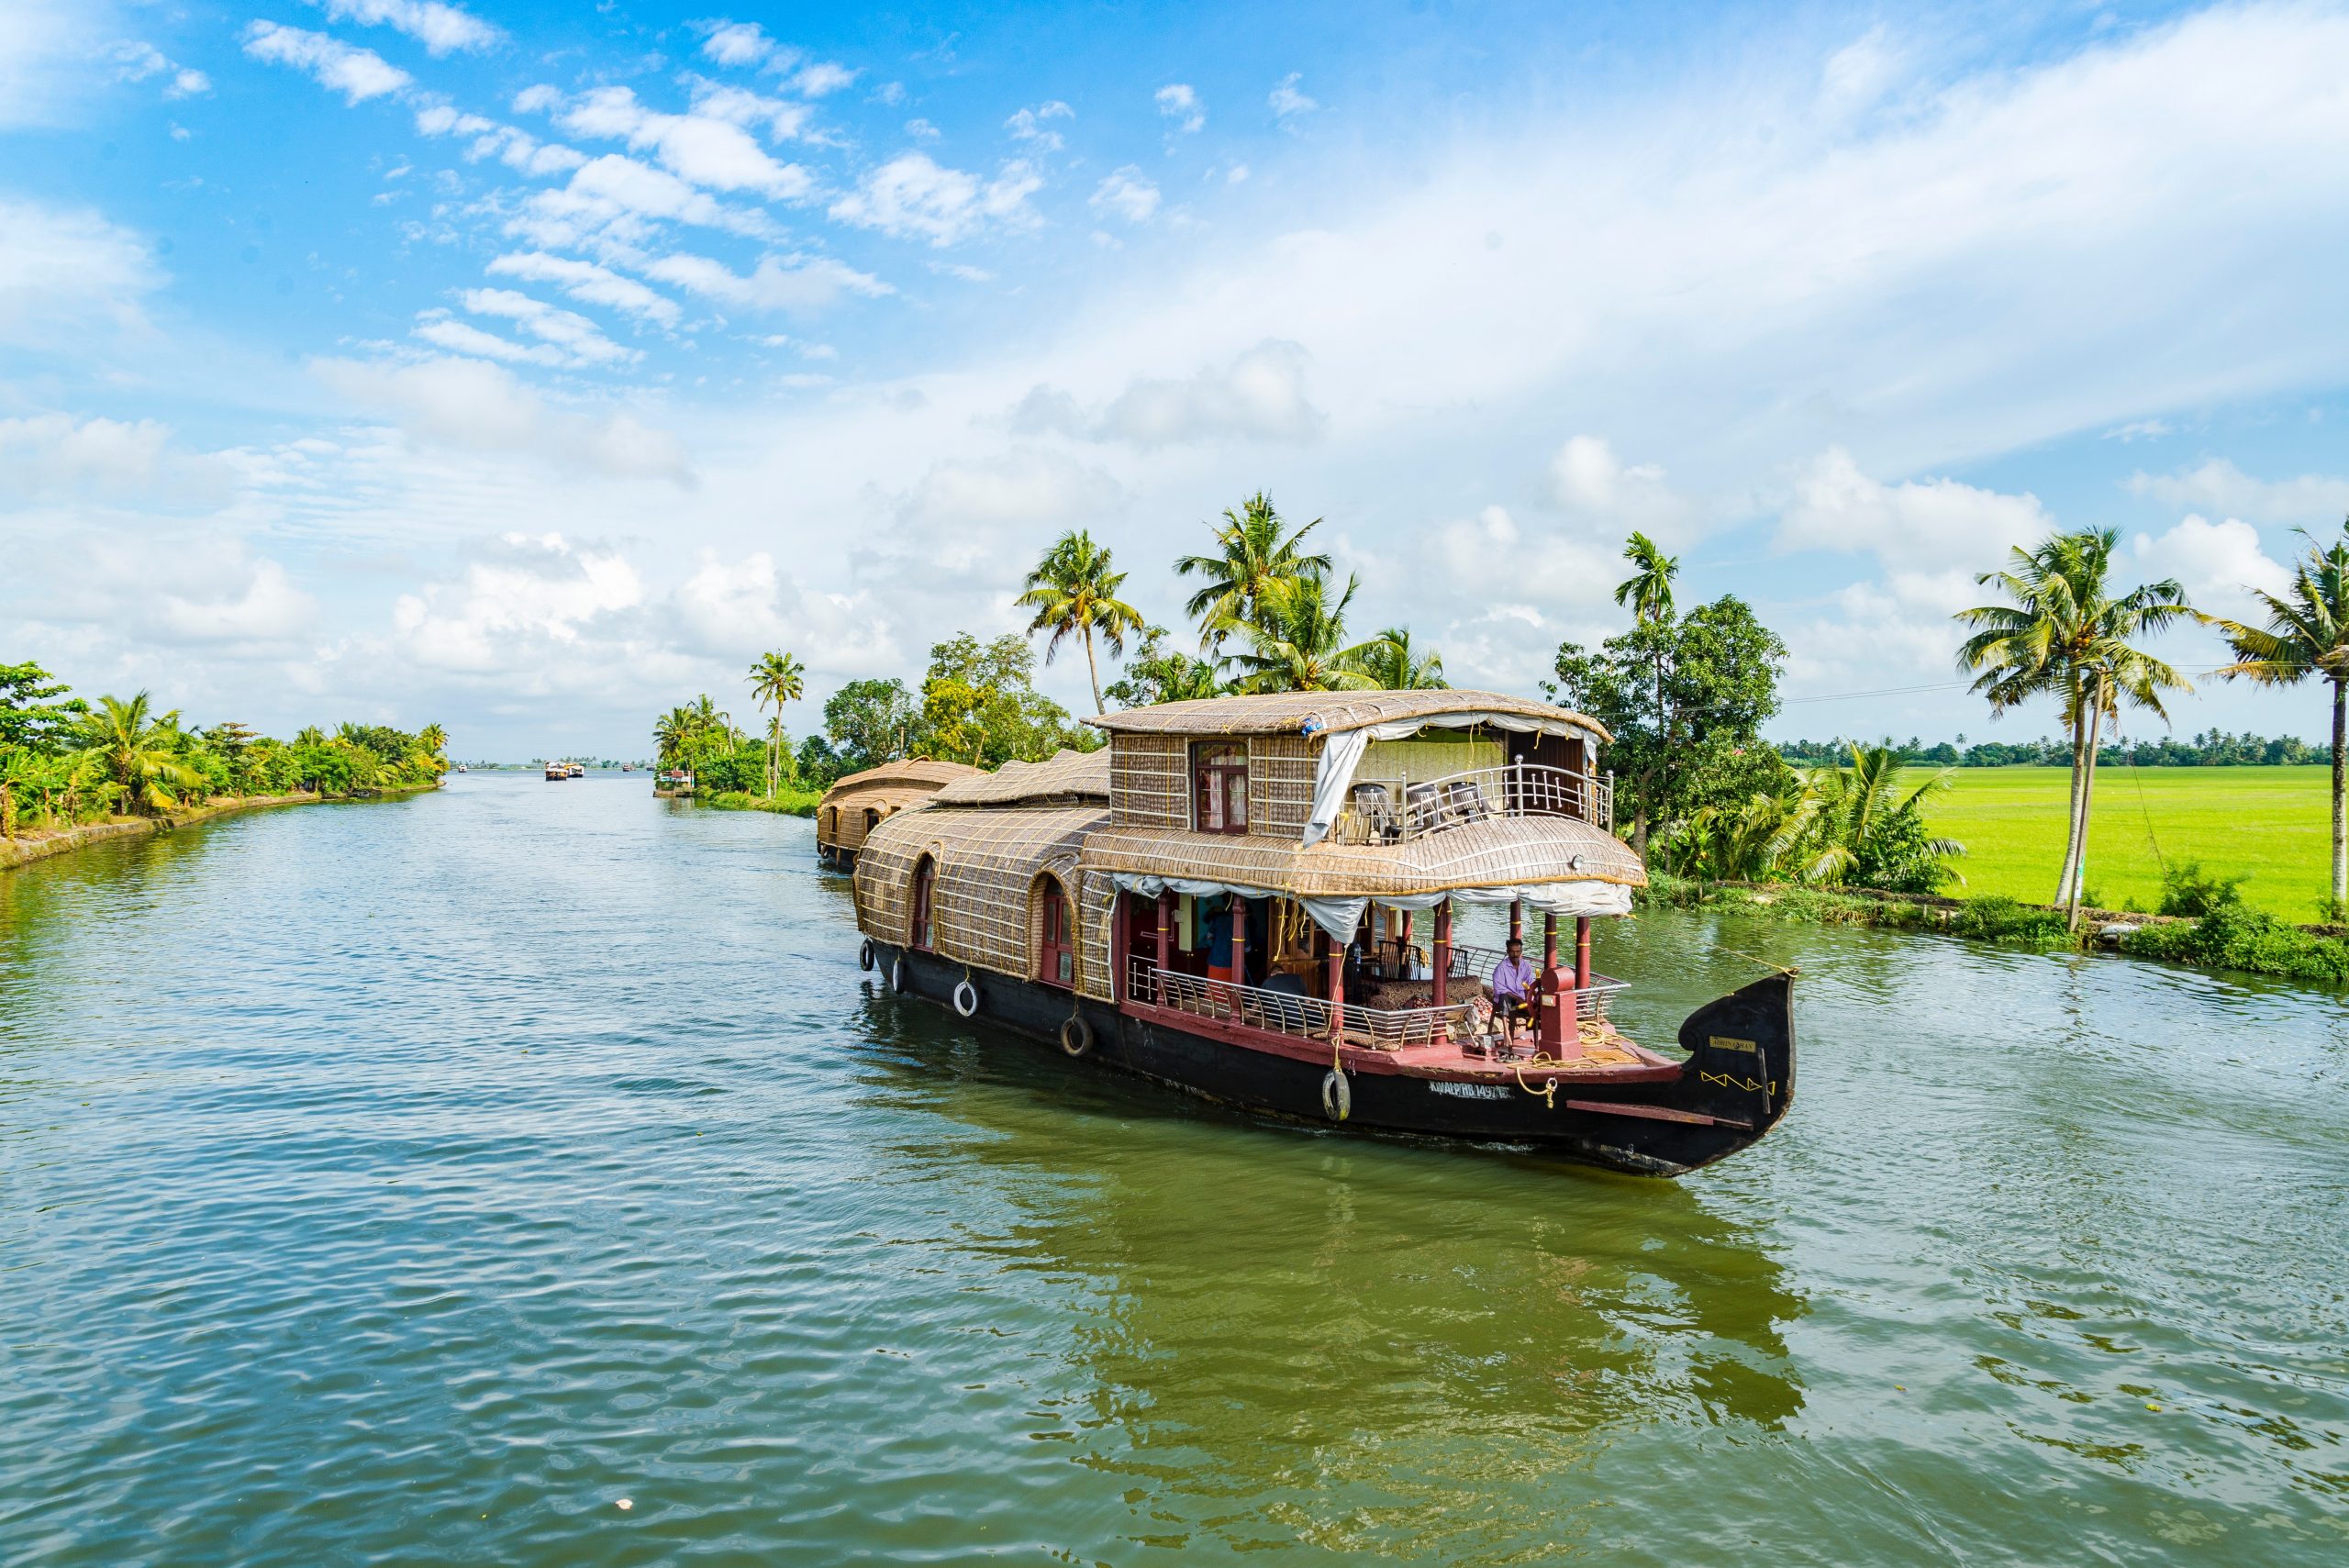 A Visit To Alleppey - Make Rivers A Part Of Your Daily Life In Kerala